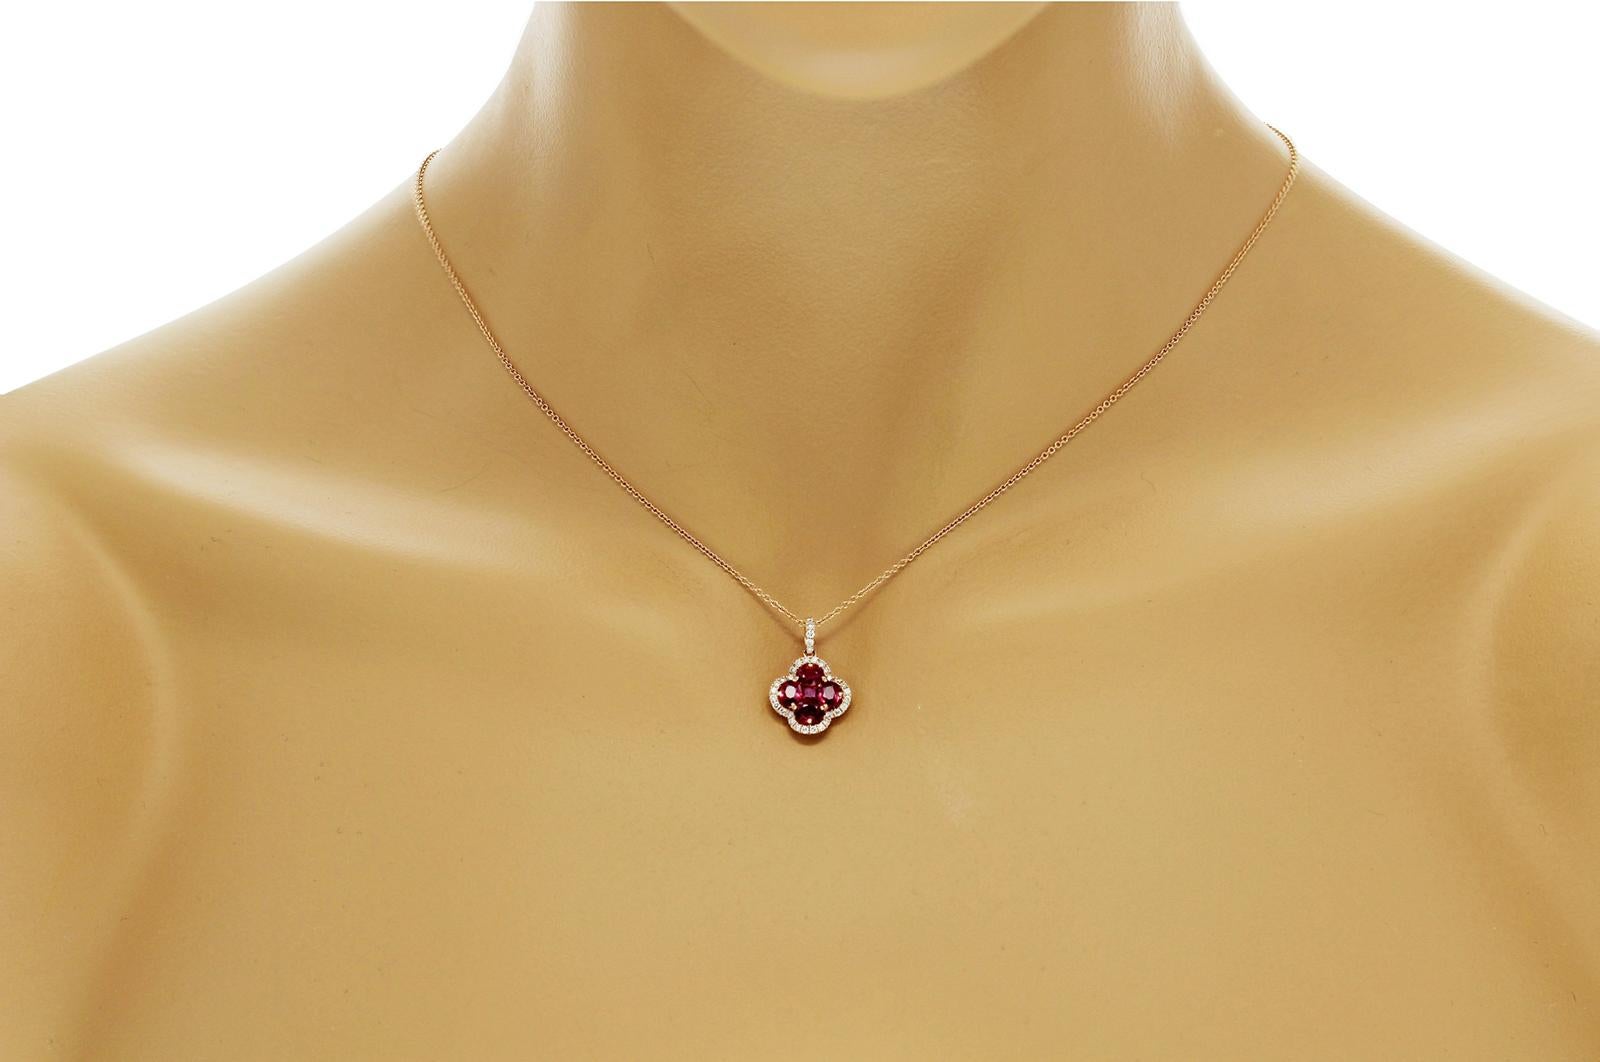 100% Authentic, 100% Customer Satisfaction, 

Pendant: 13 mm

Chain: 0.5 mm

Size: 18 Inches

Metal: 18K Rose Gold

Hallmarks: 18K

Total Weight: 3 Grams

Stone Type: 1.10 CT Natural HIgh-Quality Ruby &  Diamond 0.25 CT  G   SI1

Condition: New With